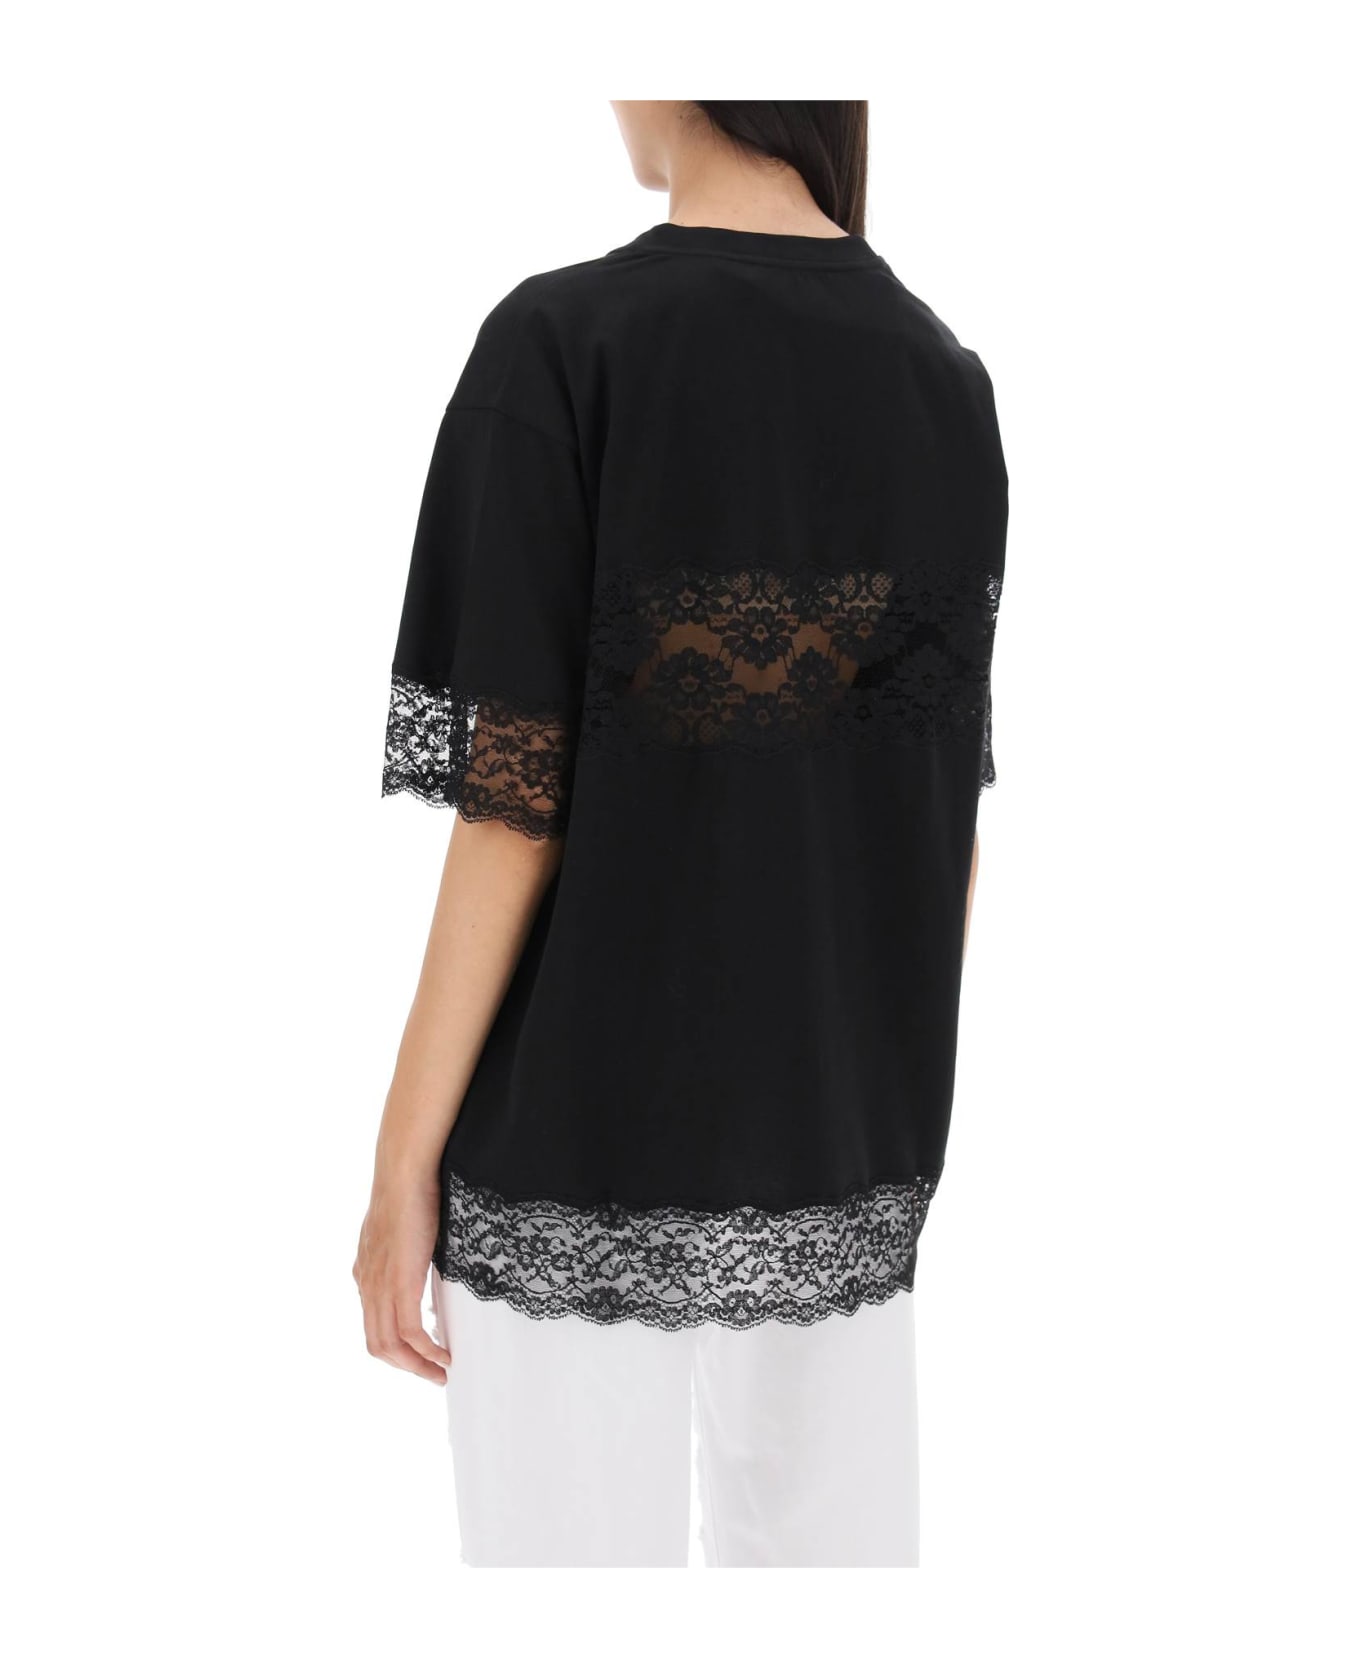 Dolce & Gabbana T-shirt With Lace Inserts - NERO (Black) Tシャツ